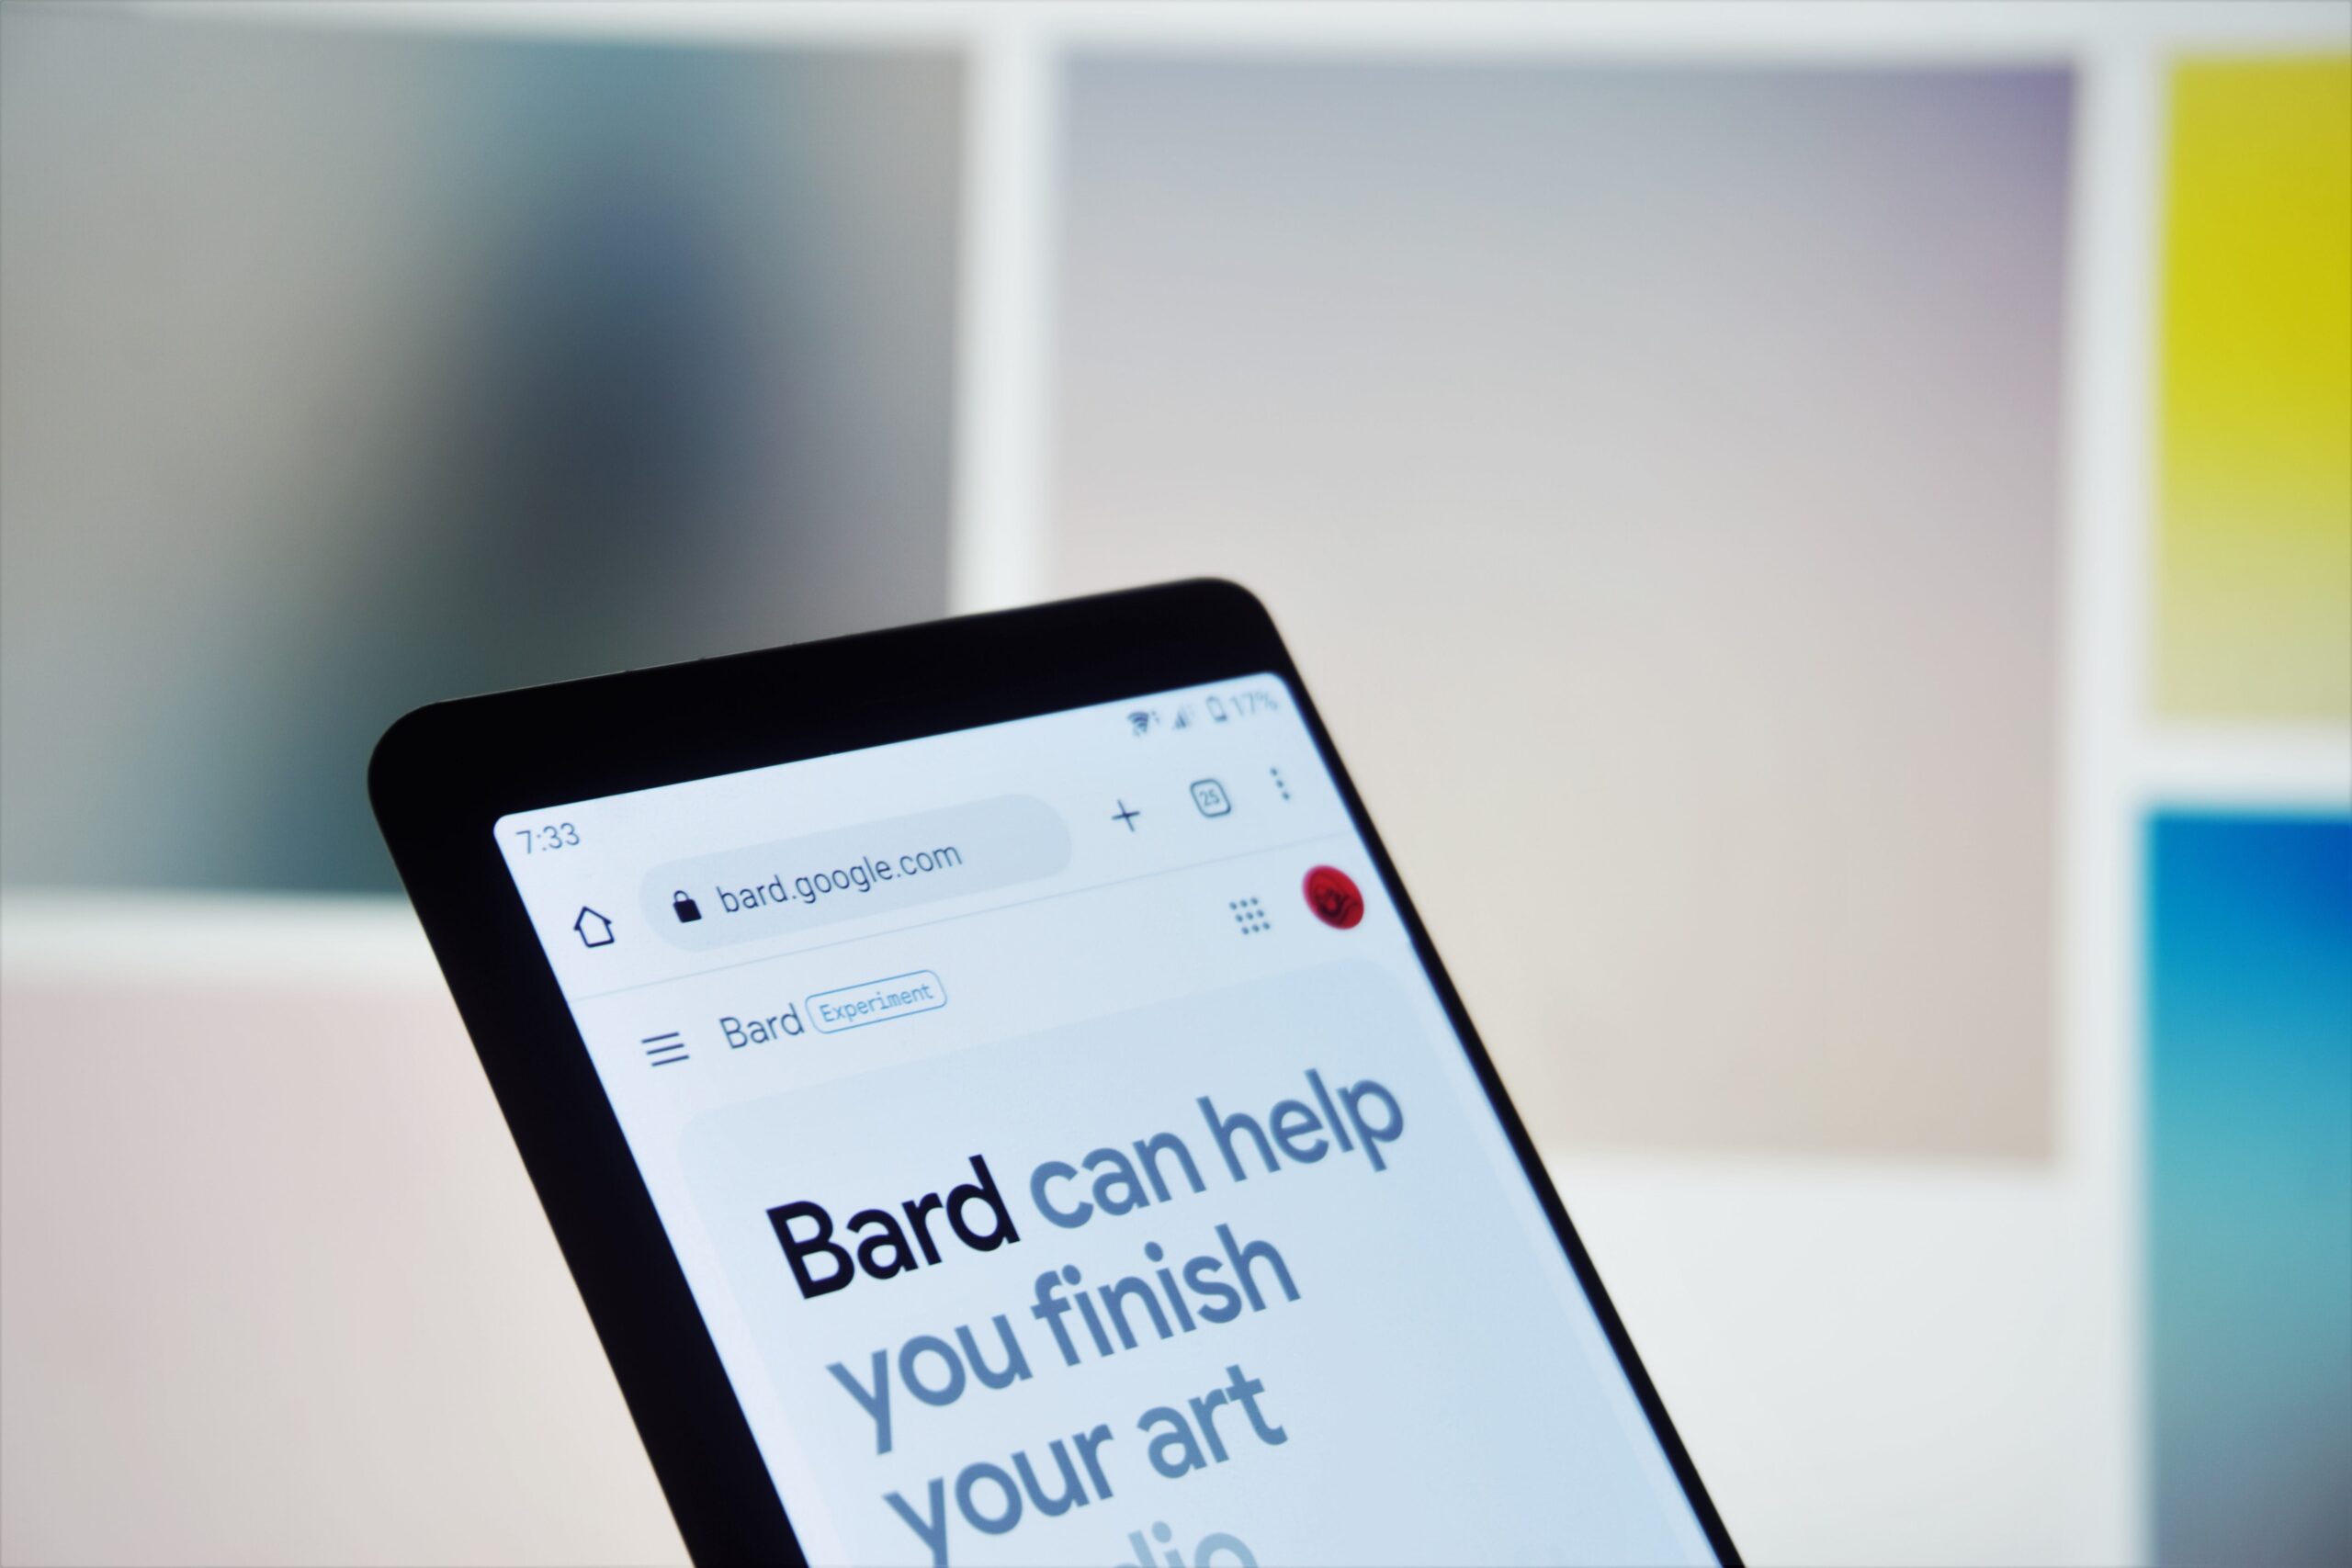 Google Rolls Out Global Update for Bard Chatbot, Featuring Gemini Pro and More AI Tools